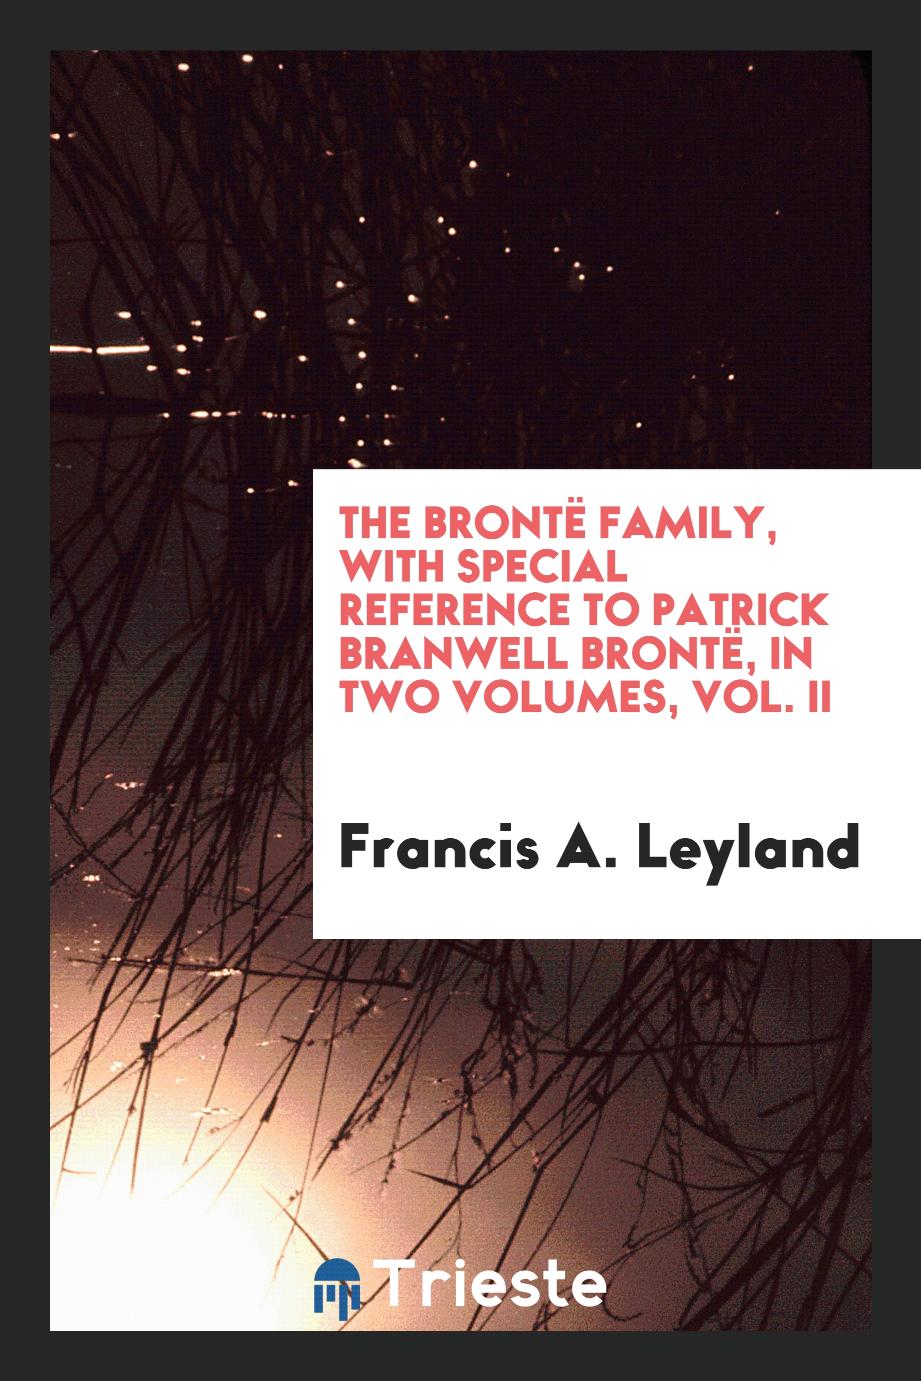 The Brontë Family, with Special Reference to Patrick Branwell Brontë, in Two Volumes, Vol. II